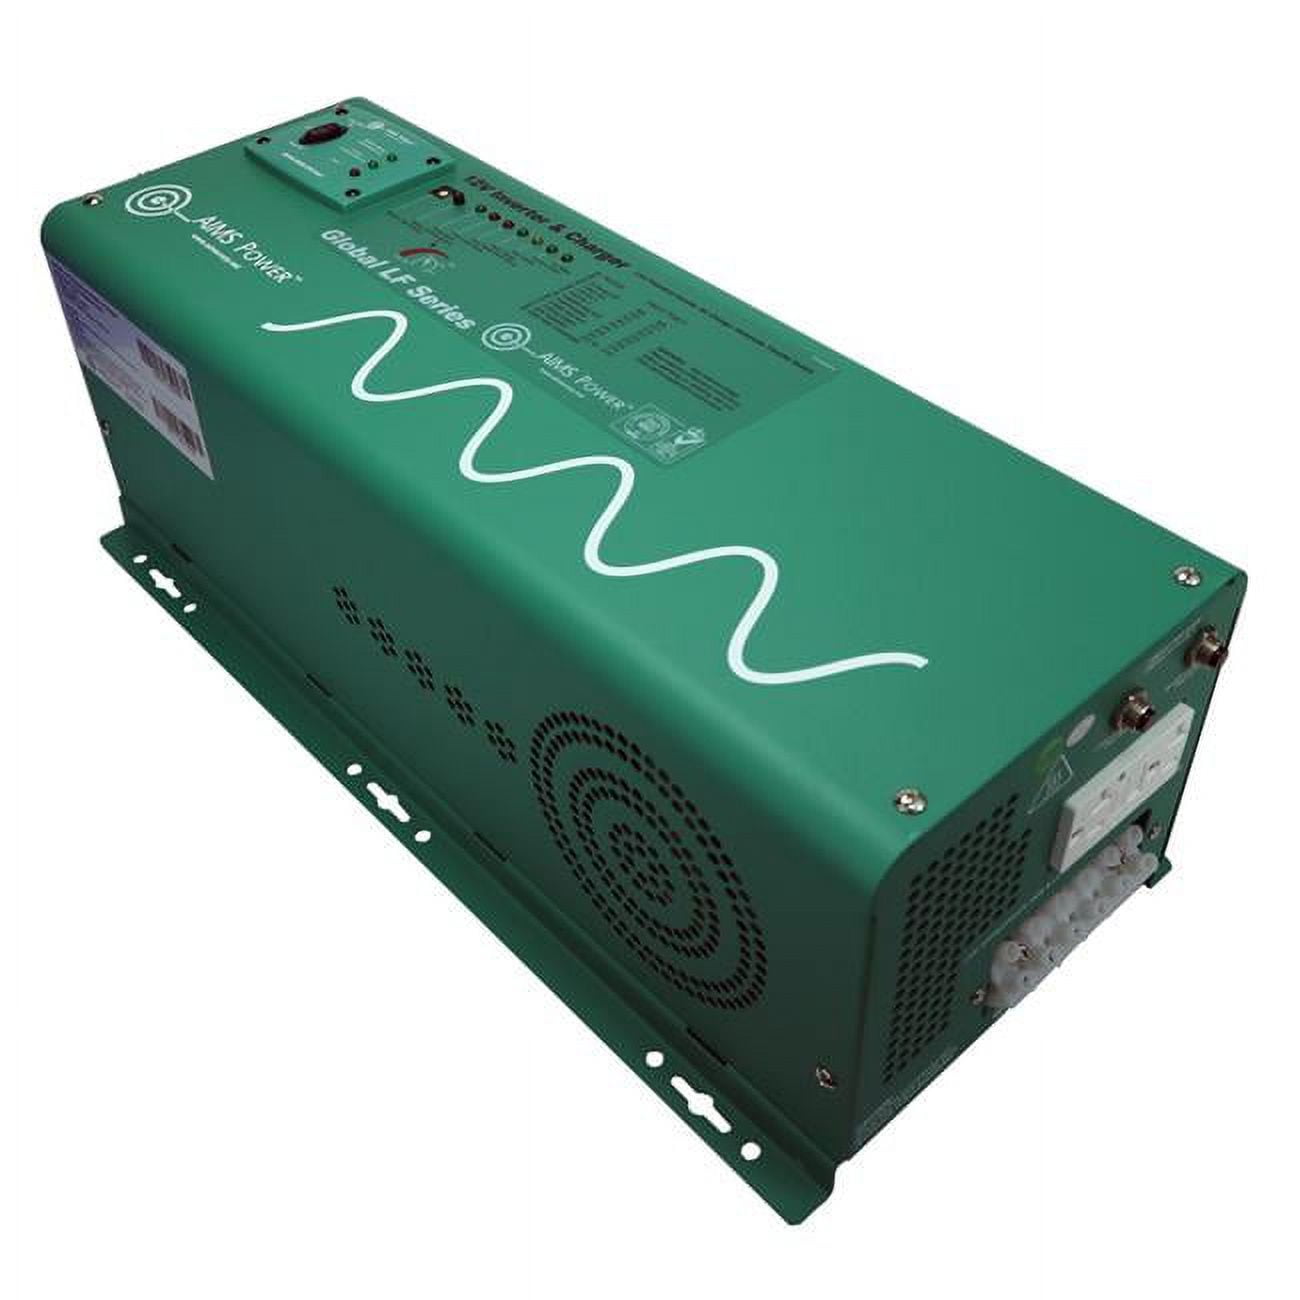 Picture of AIMS PICOGLF25W12V120AL 12 VDC to 120 VAC 2500W Low Frequency Pure Sine Inverter Charger